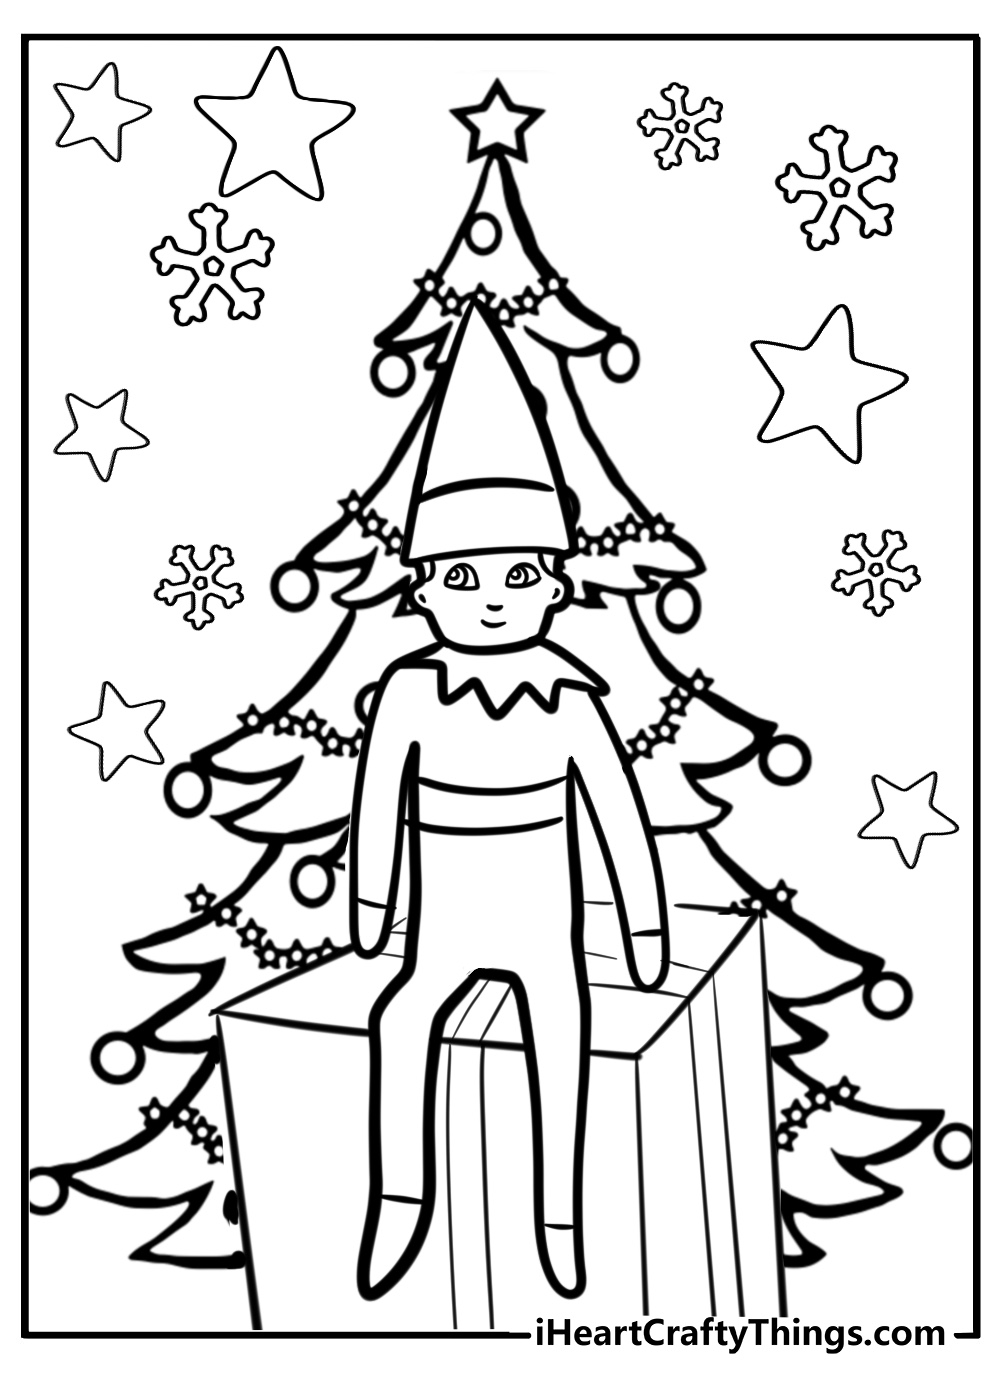 Elf on the shelf coloring pages for christmas